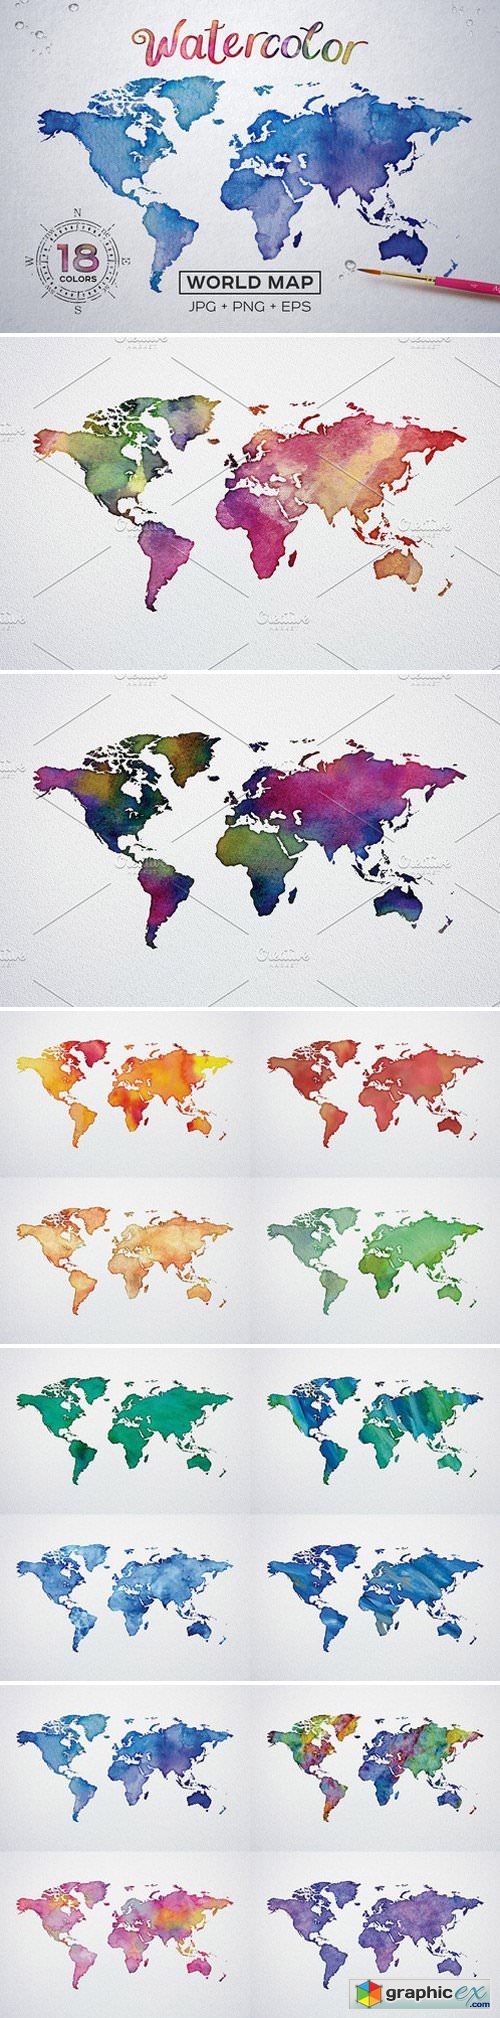 Watercolor World Maps JPG+EPS+PNG